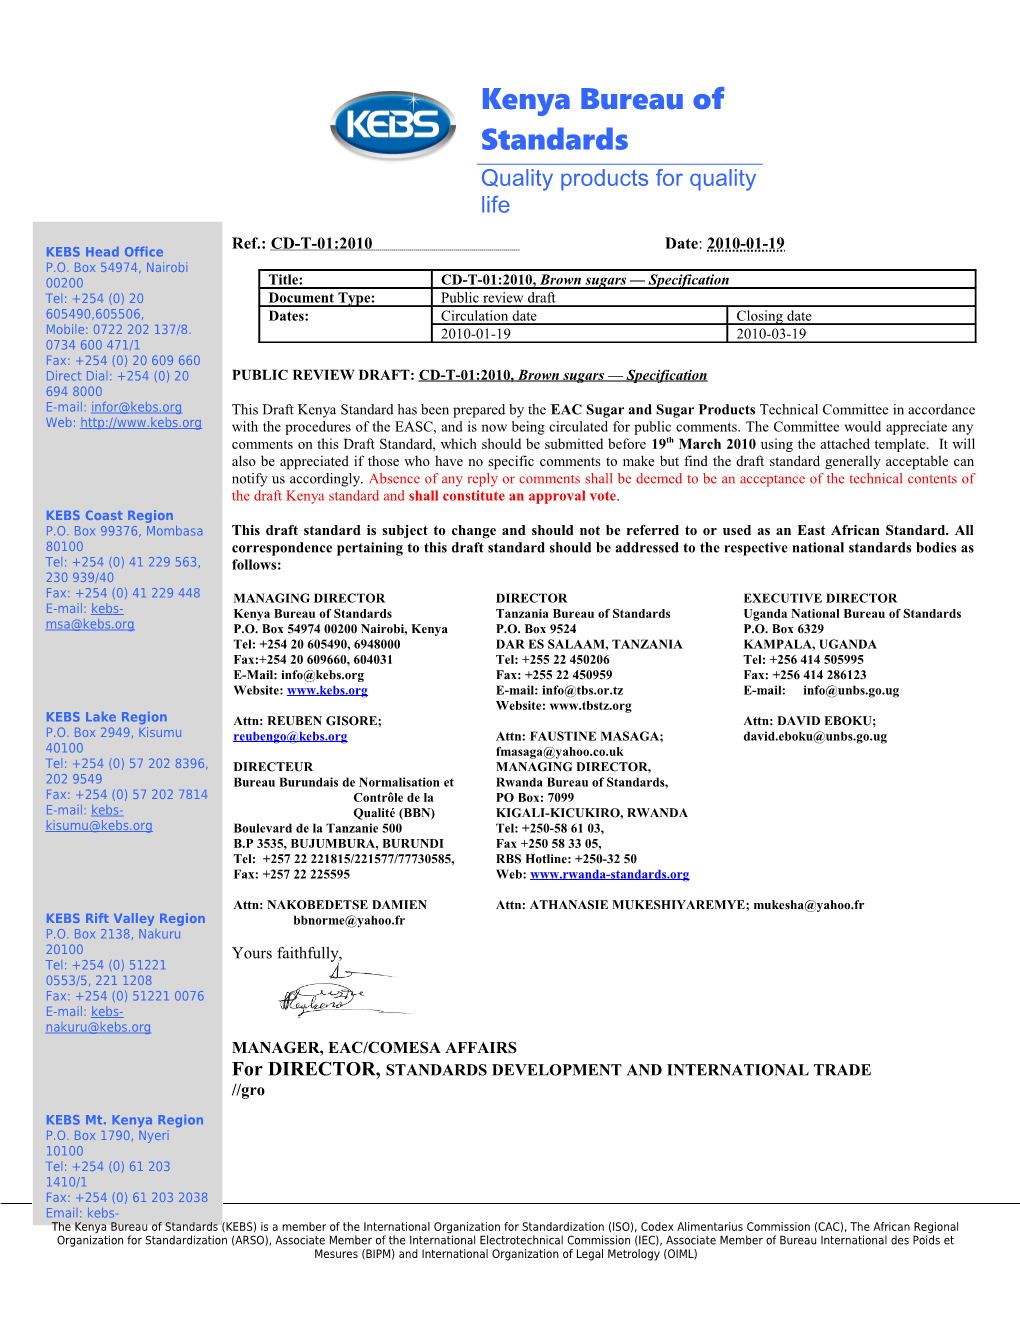 Number and Title of Draft Standard: CD-T-01:2010, Brown Sugars Specification